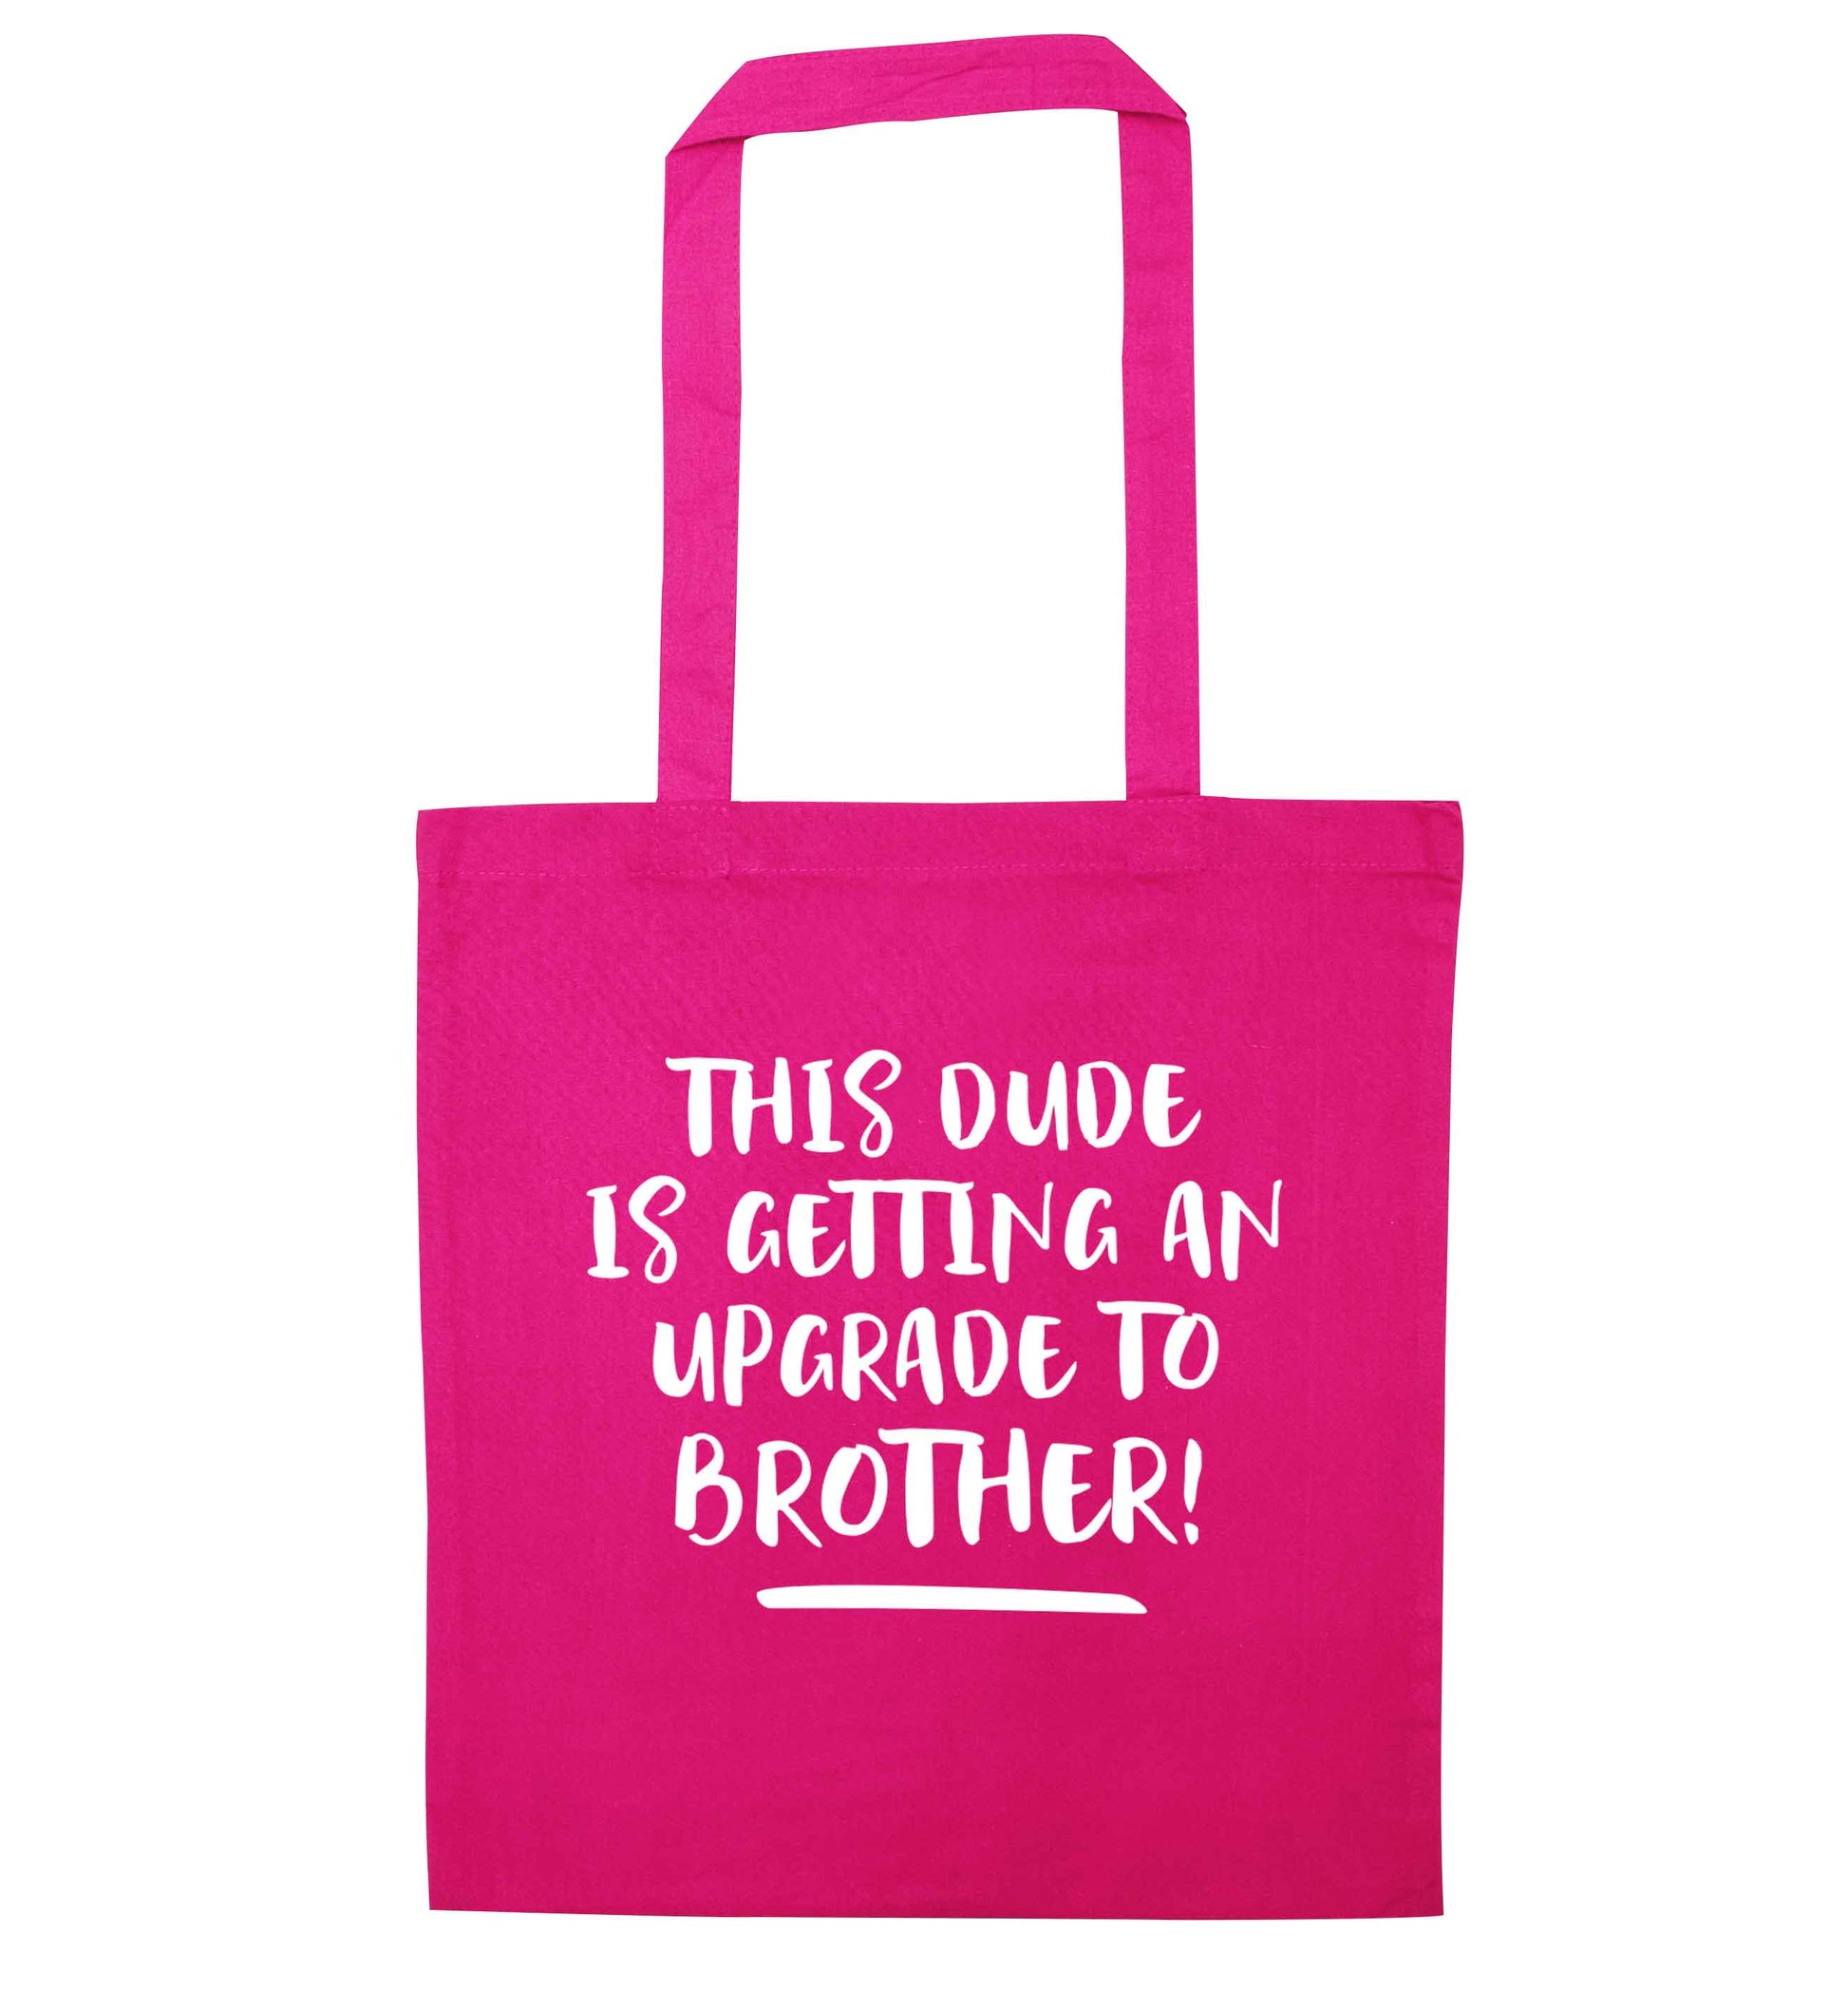 This dude is getting an upgrade to brother! pink tote bag